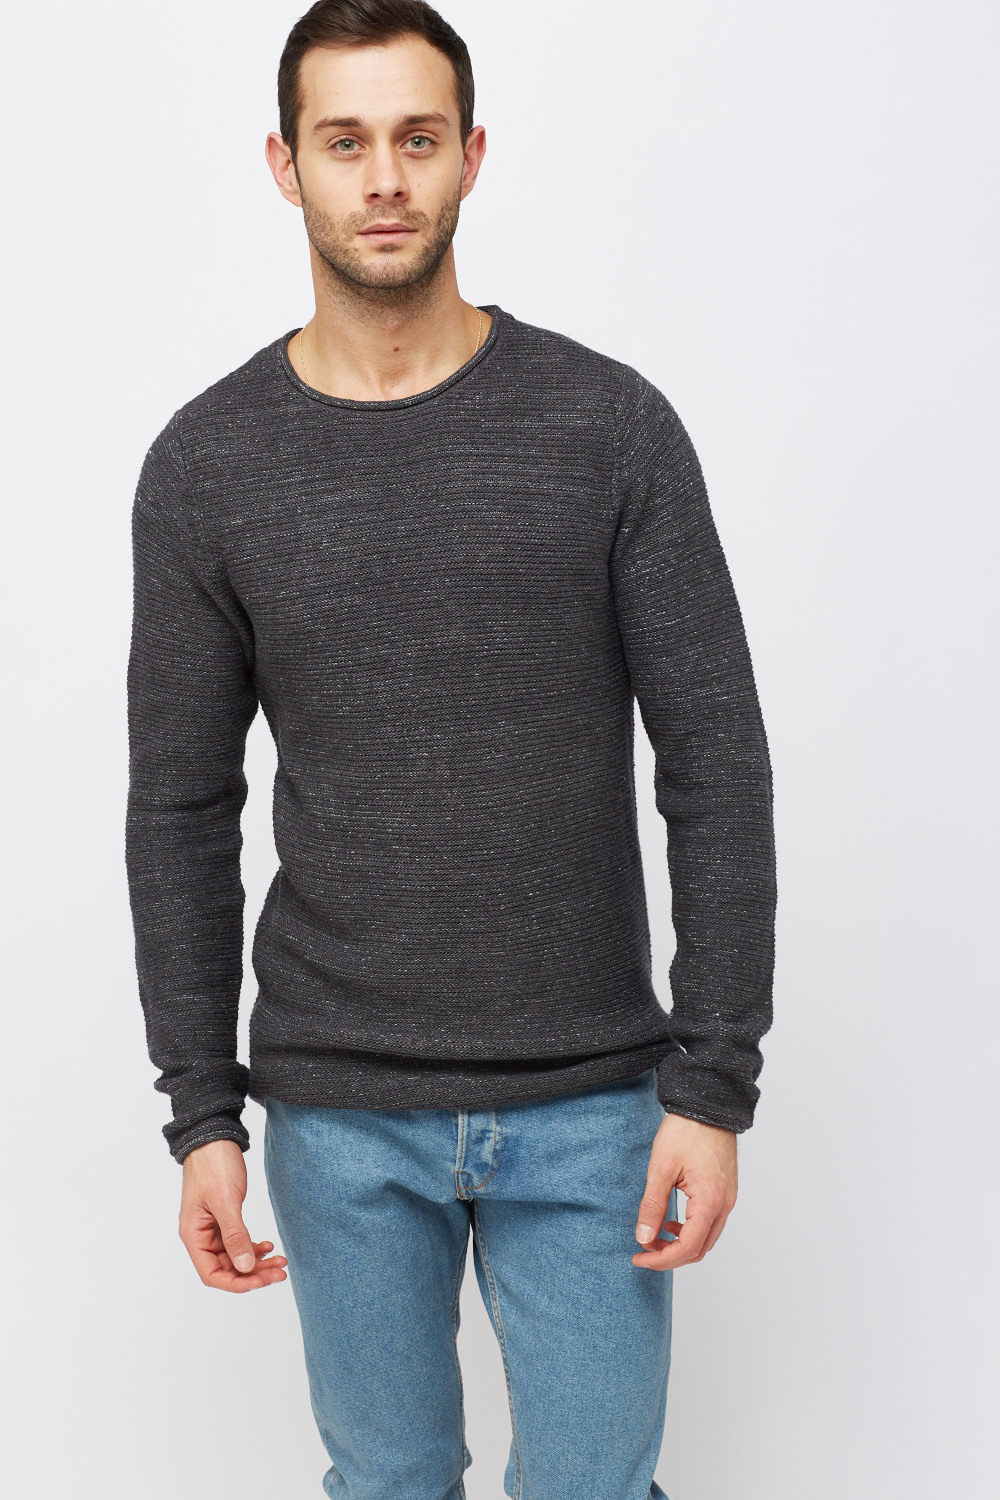 Round Neck Casual Jumper - Just $6